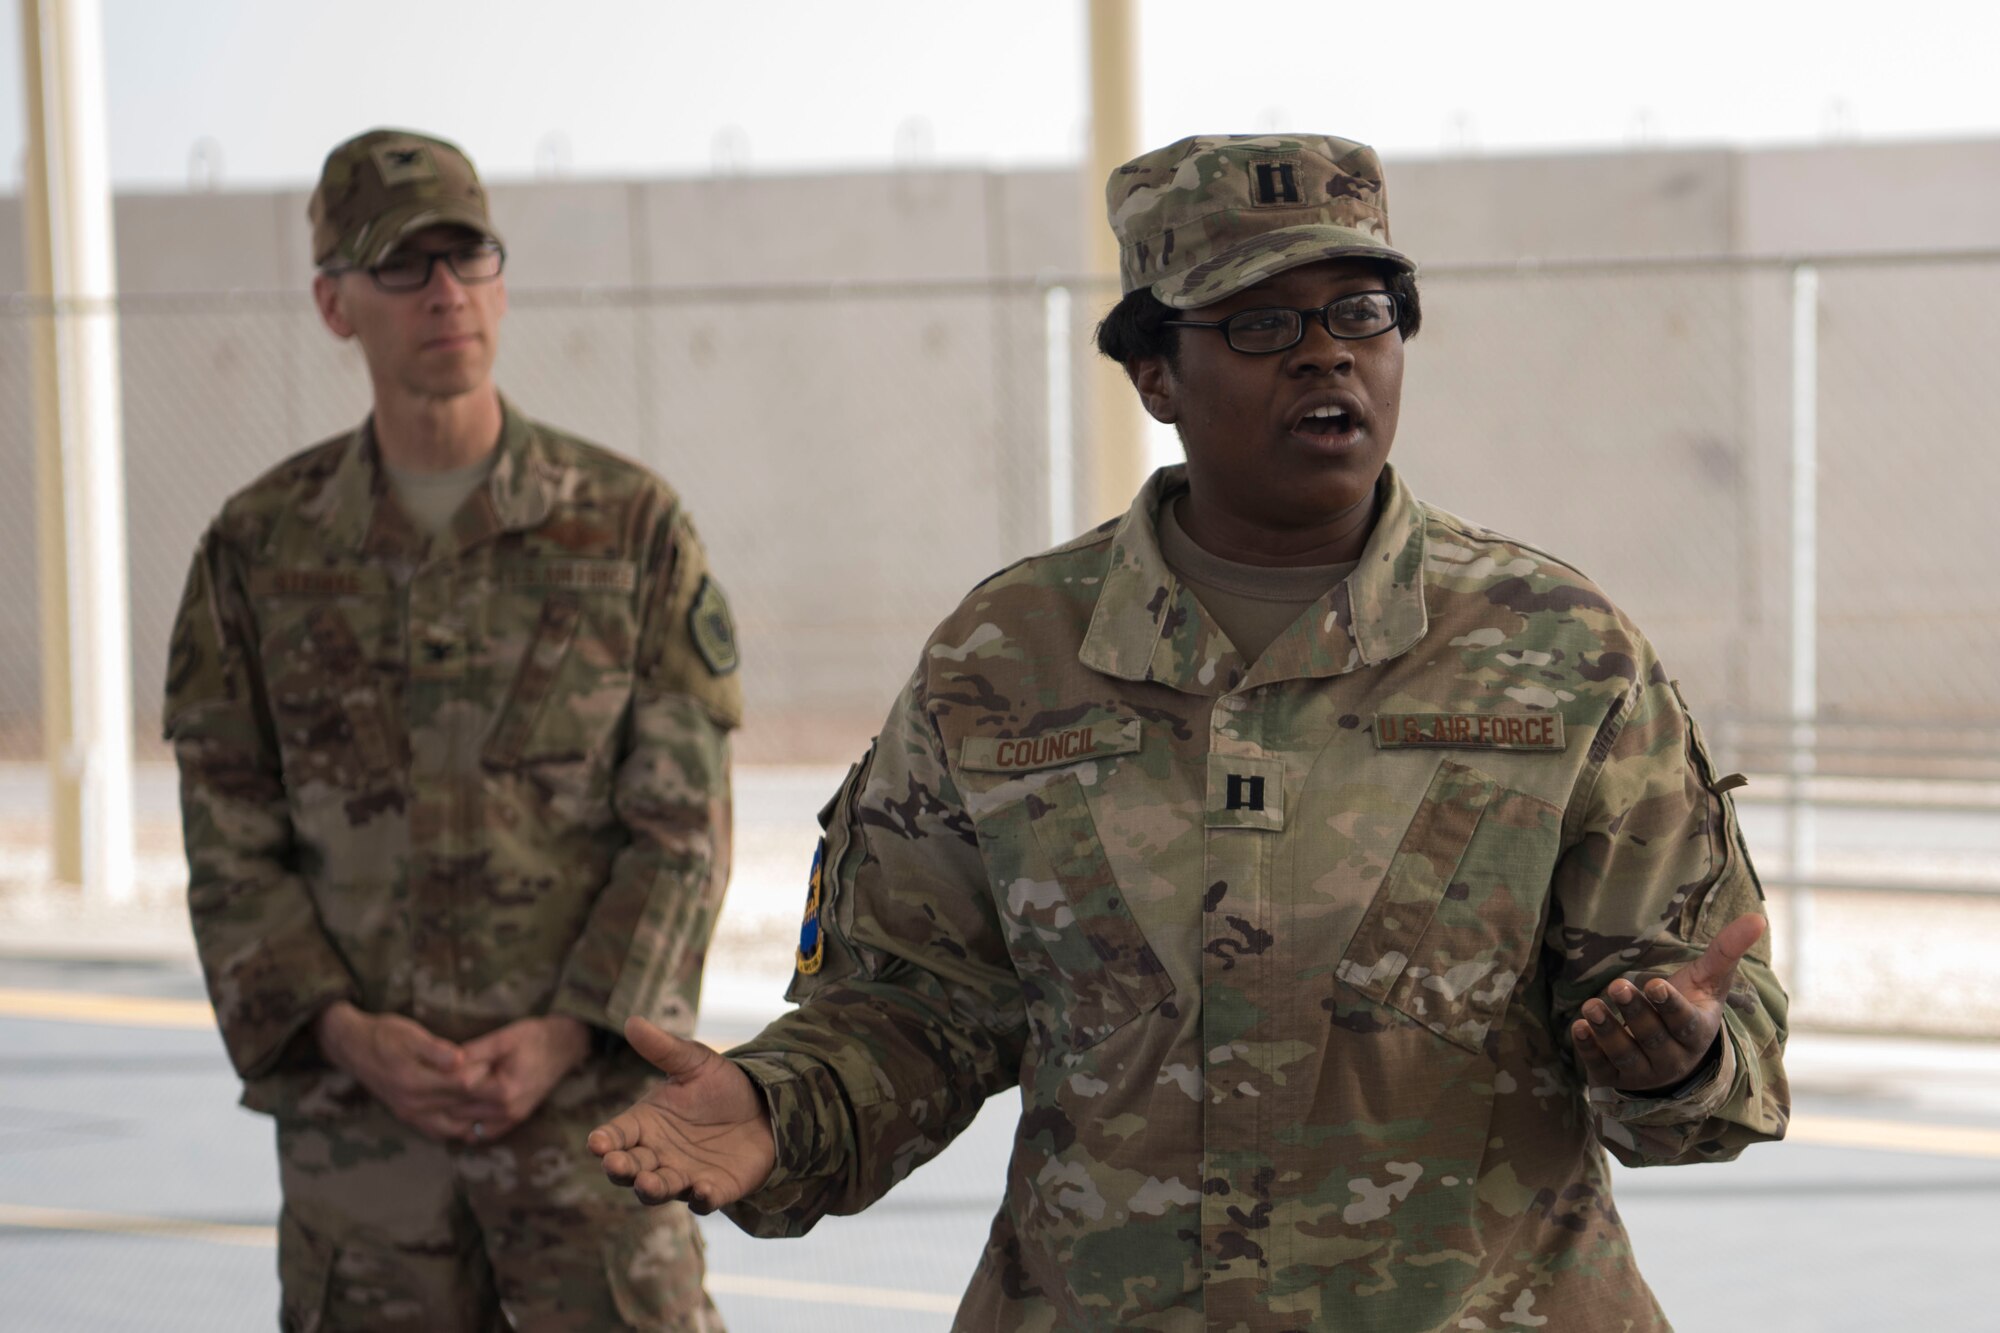 Capt. Jaleesa Council, Sexual Assault Prevention and Response office sexual assault response coordinator, thanks the Commander’s Challenge participants at the conclusion of the event May 4, 2018, at an undisclosed location in Southwest Asia.